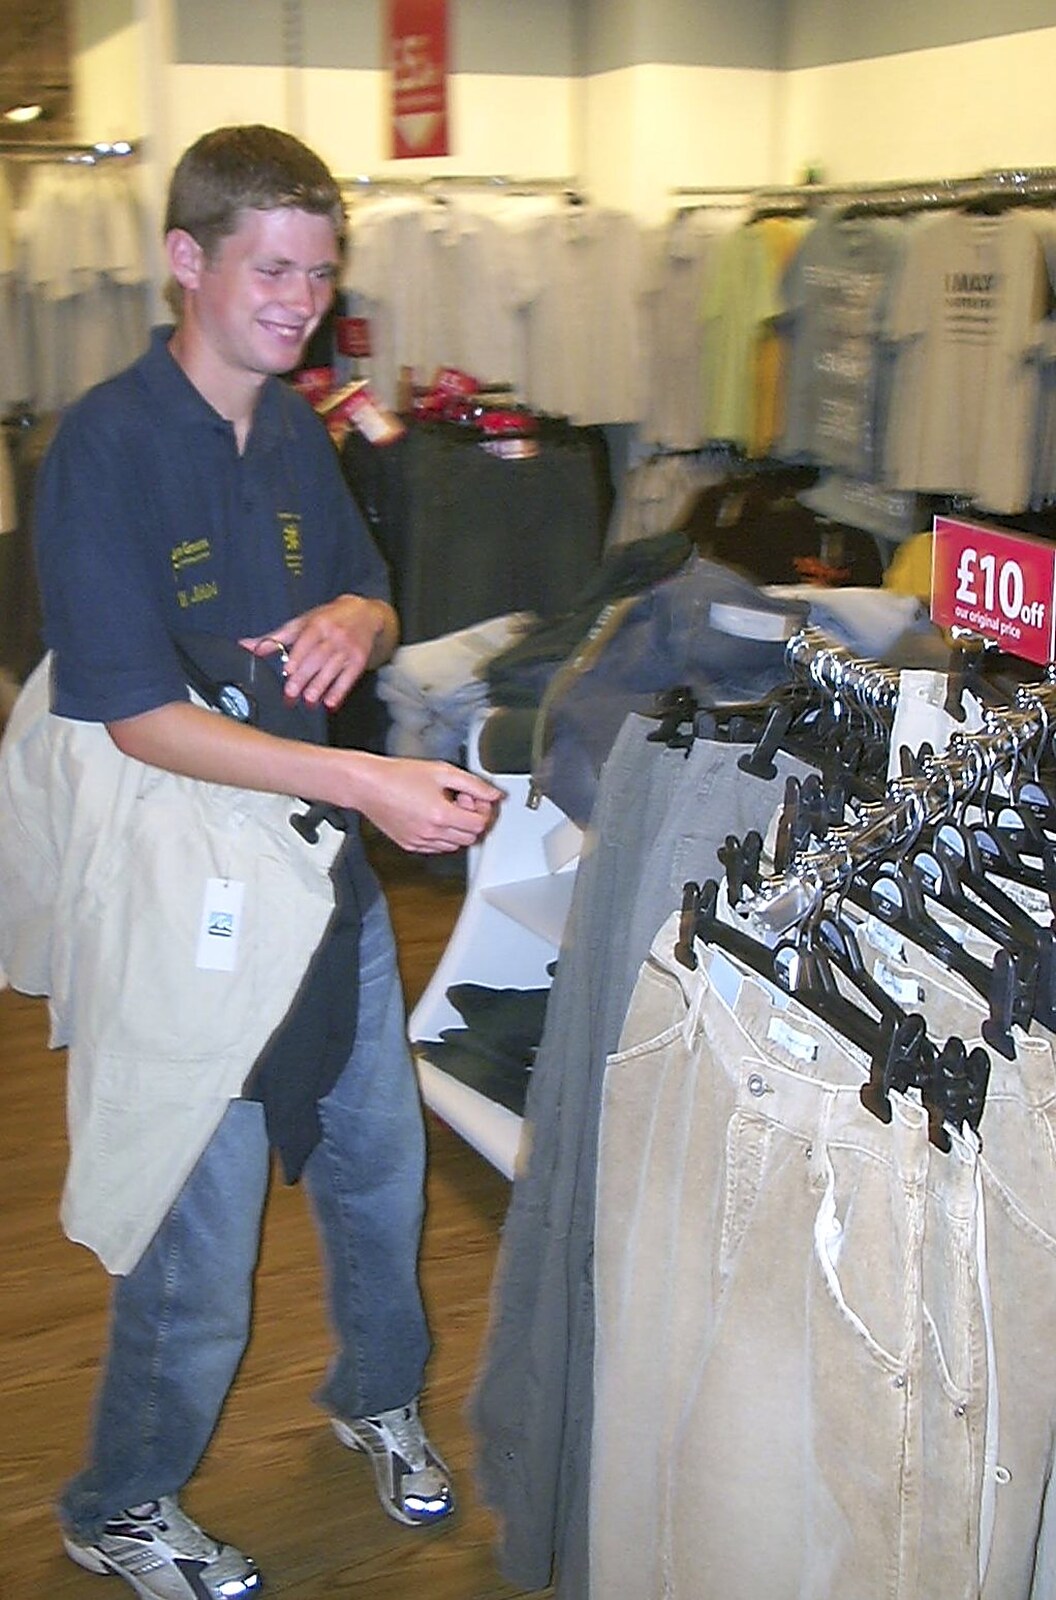 Phil checks out a sales-rack in Debenhams from Longview at the Waterfront, and a Trip to the Shops, Norwich, Norfolk - 27th June 2004